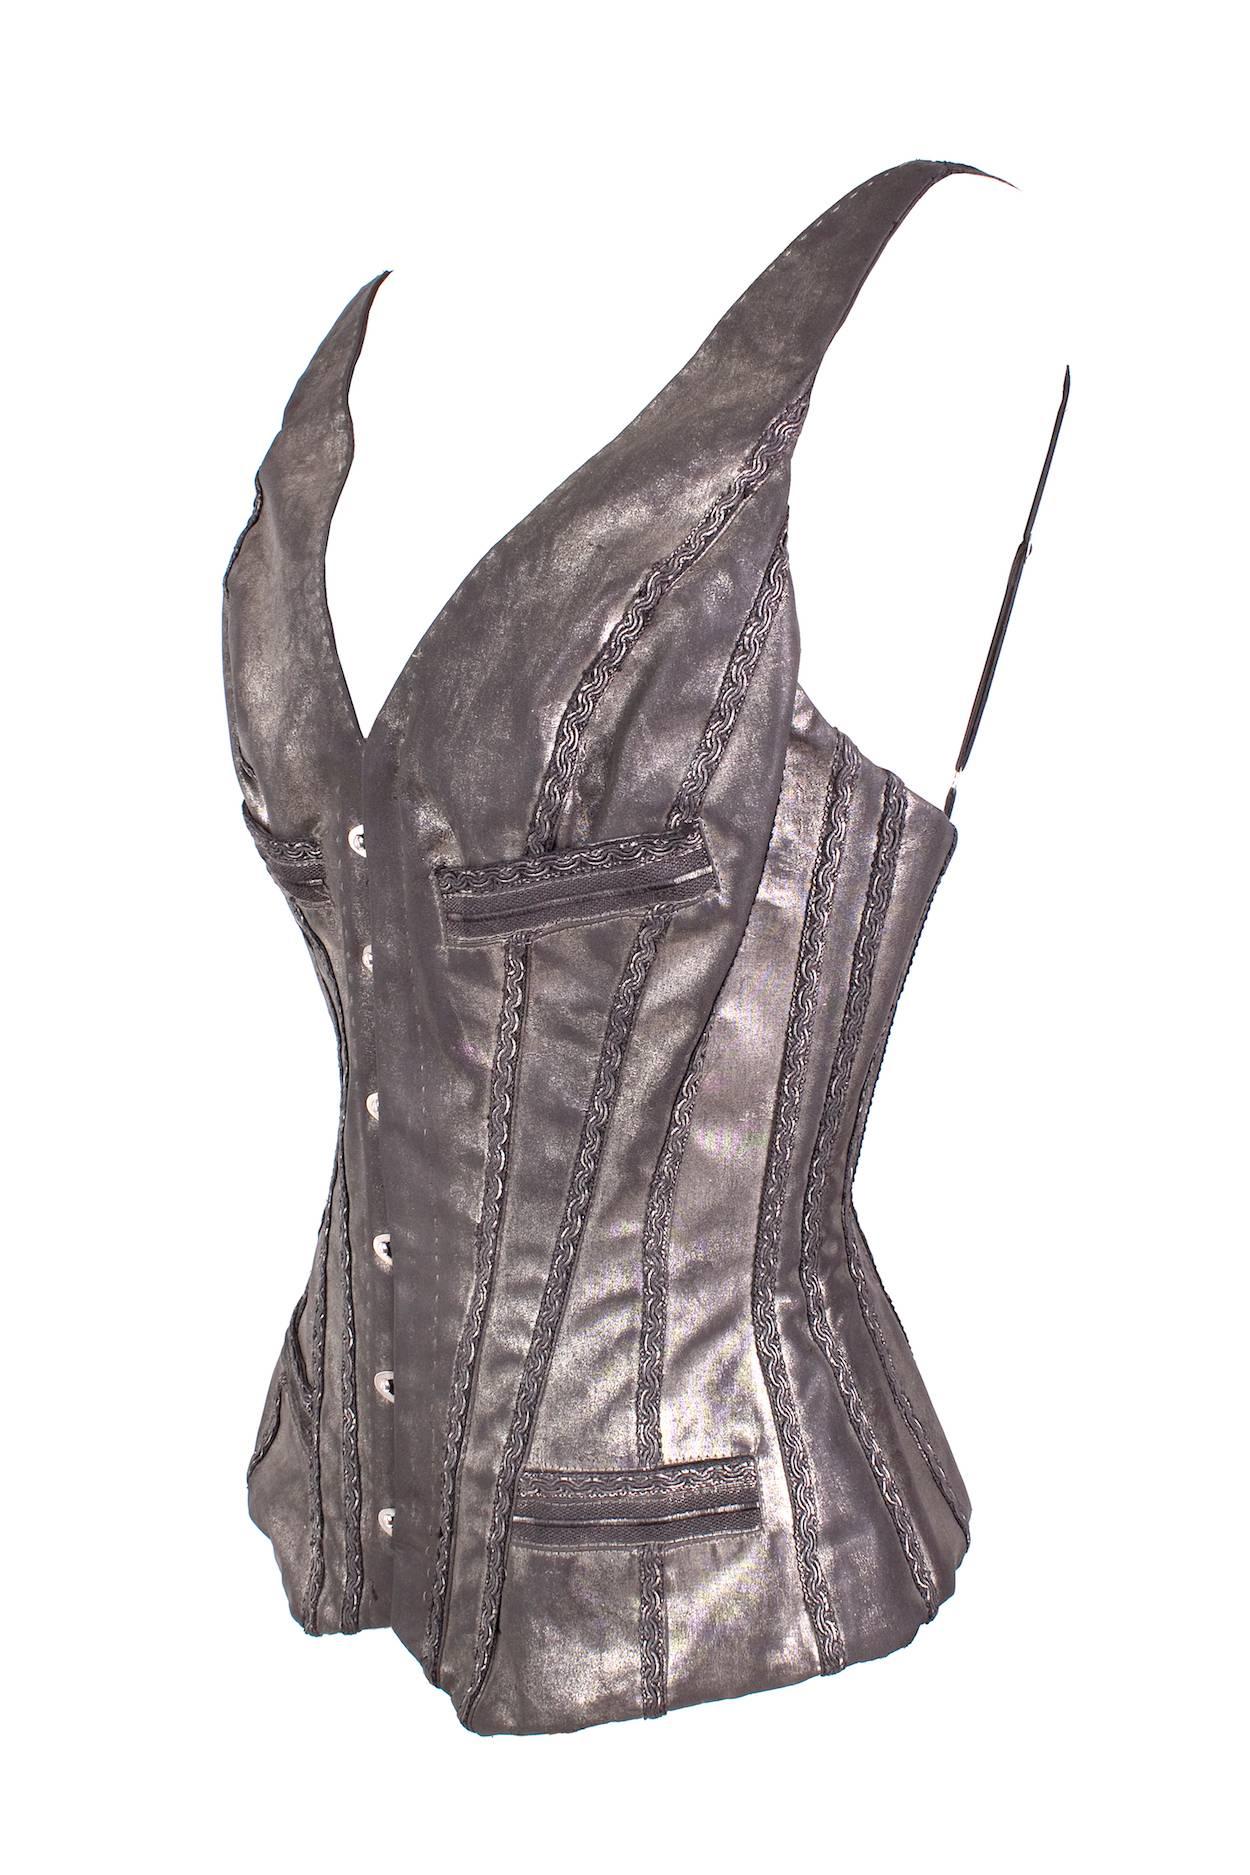 This is a corset vest by Jean Paul Gaultier c. 1990s.  It is made of a shiny metallic leather with braiding trim details and lace up in the back.  The front has a multiple latch closure.